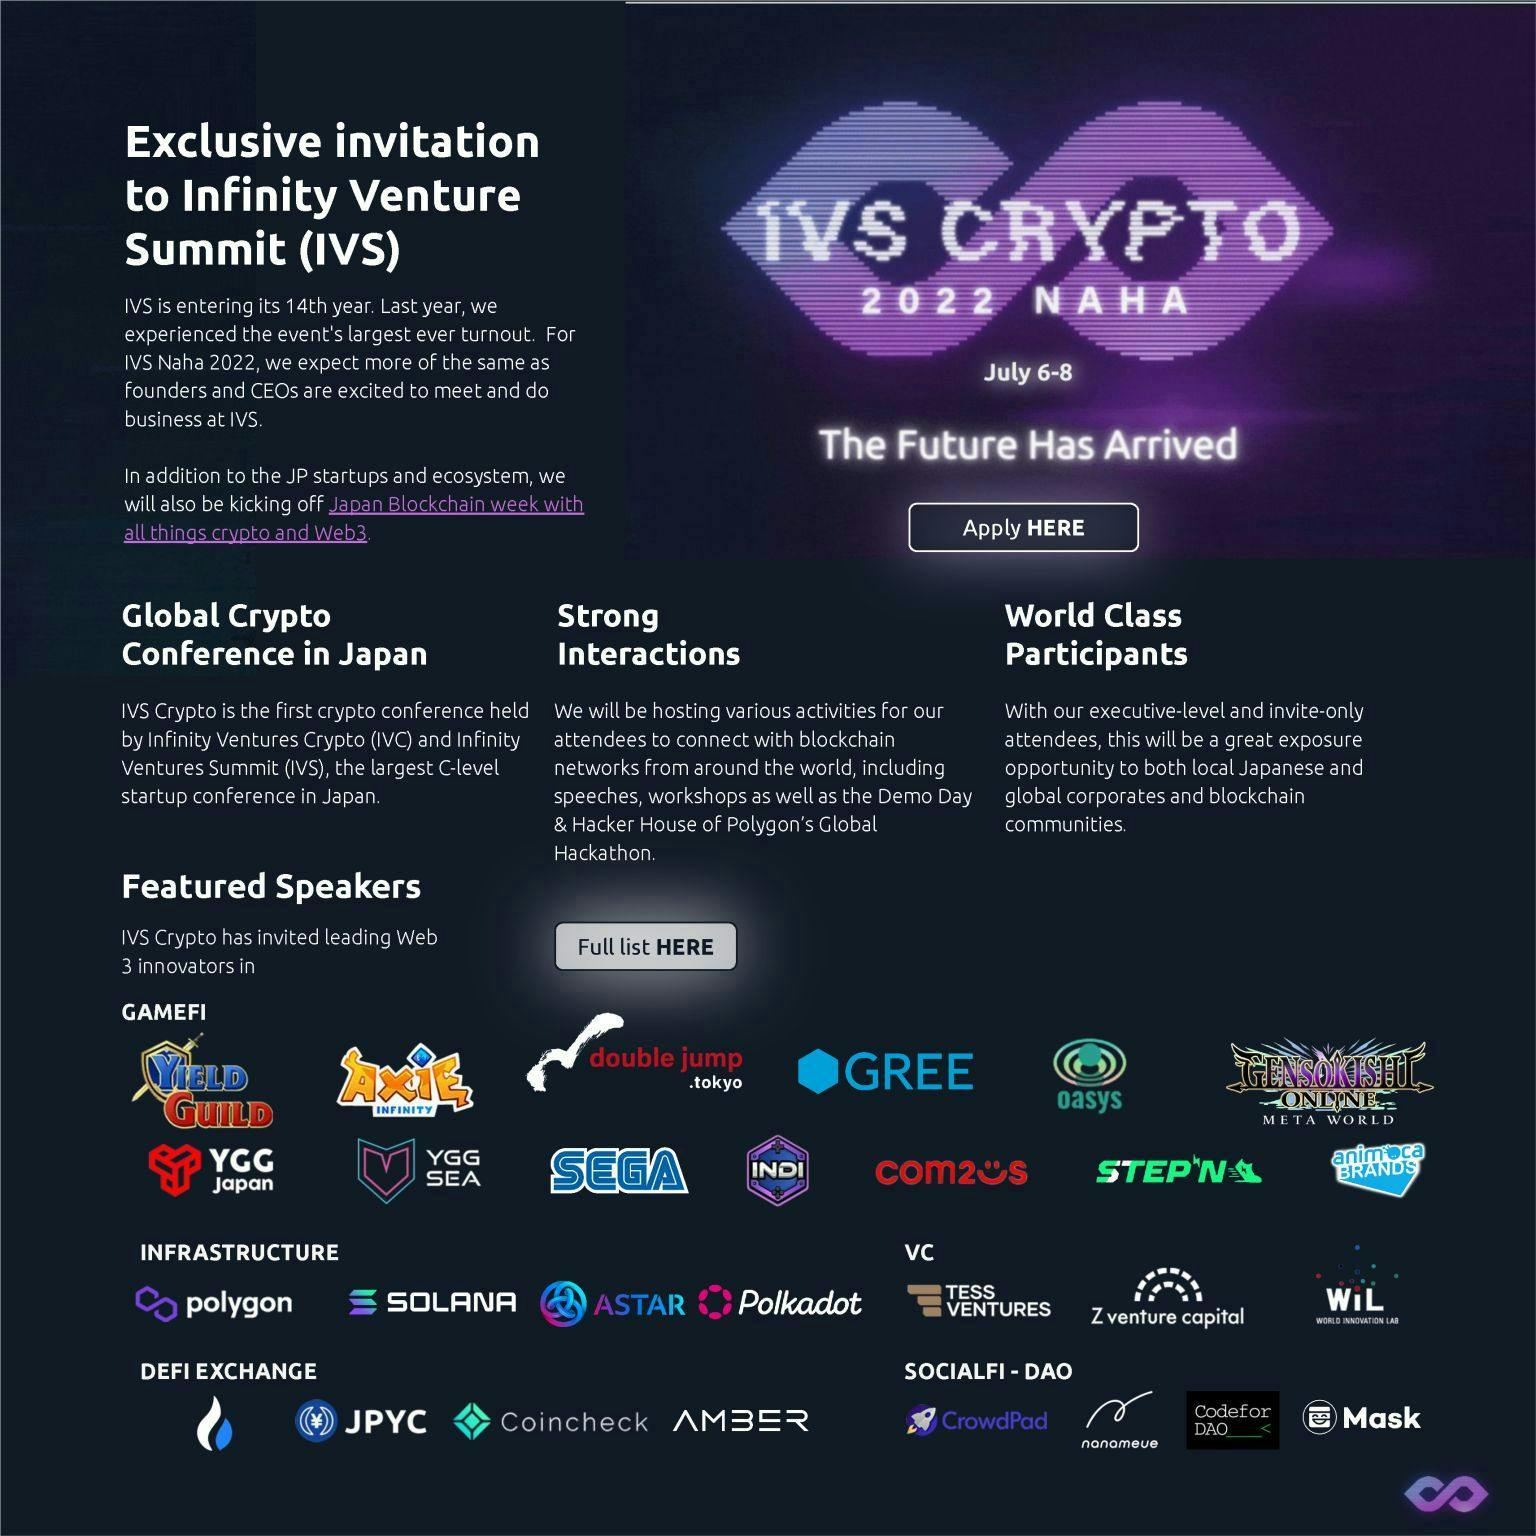 IVS Crypto 2022 Naha Join us for the 28th edition of Infinity Venture